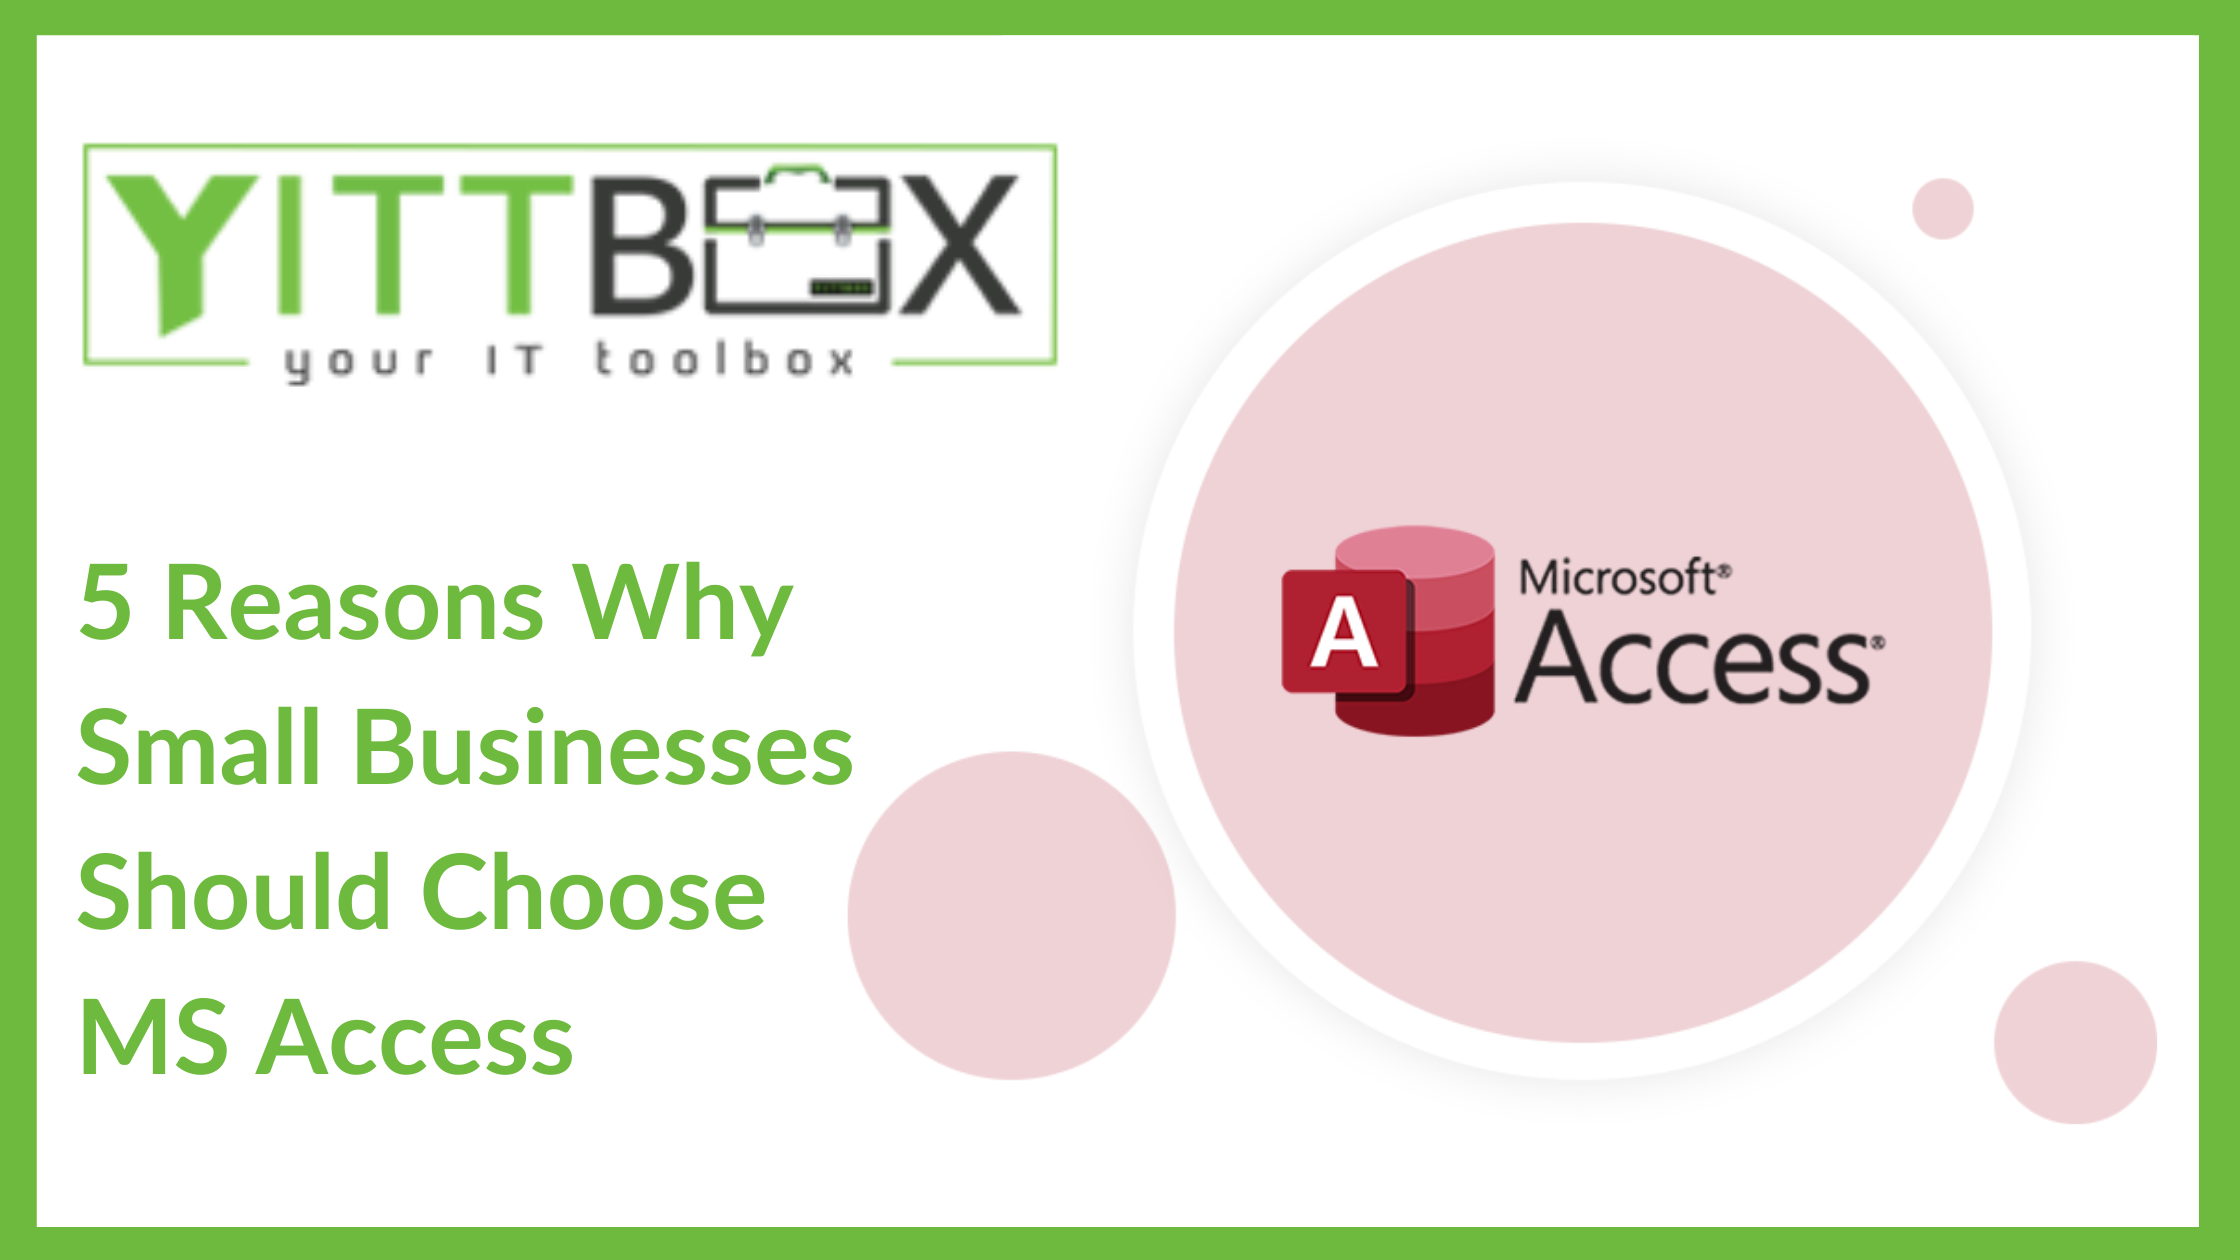 5 Reasons Why Small Businesses Should Choose MS Access